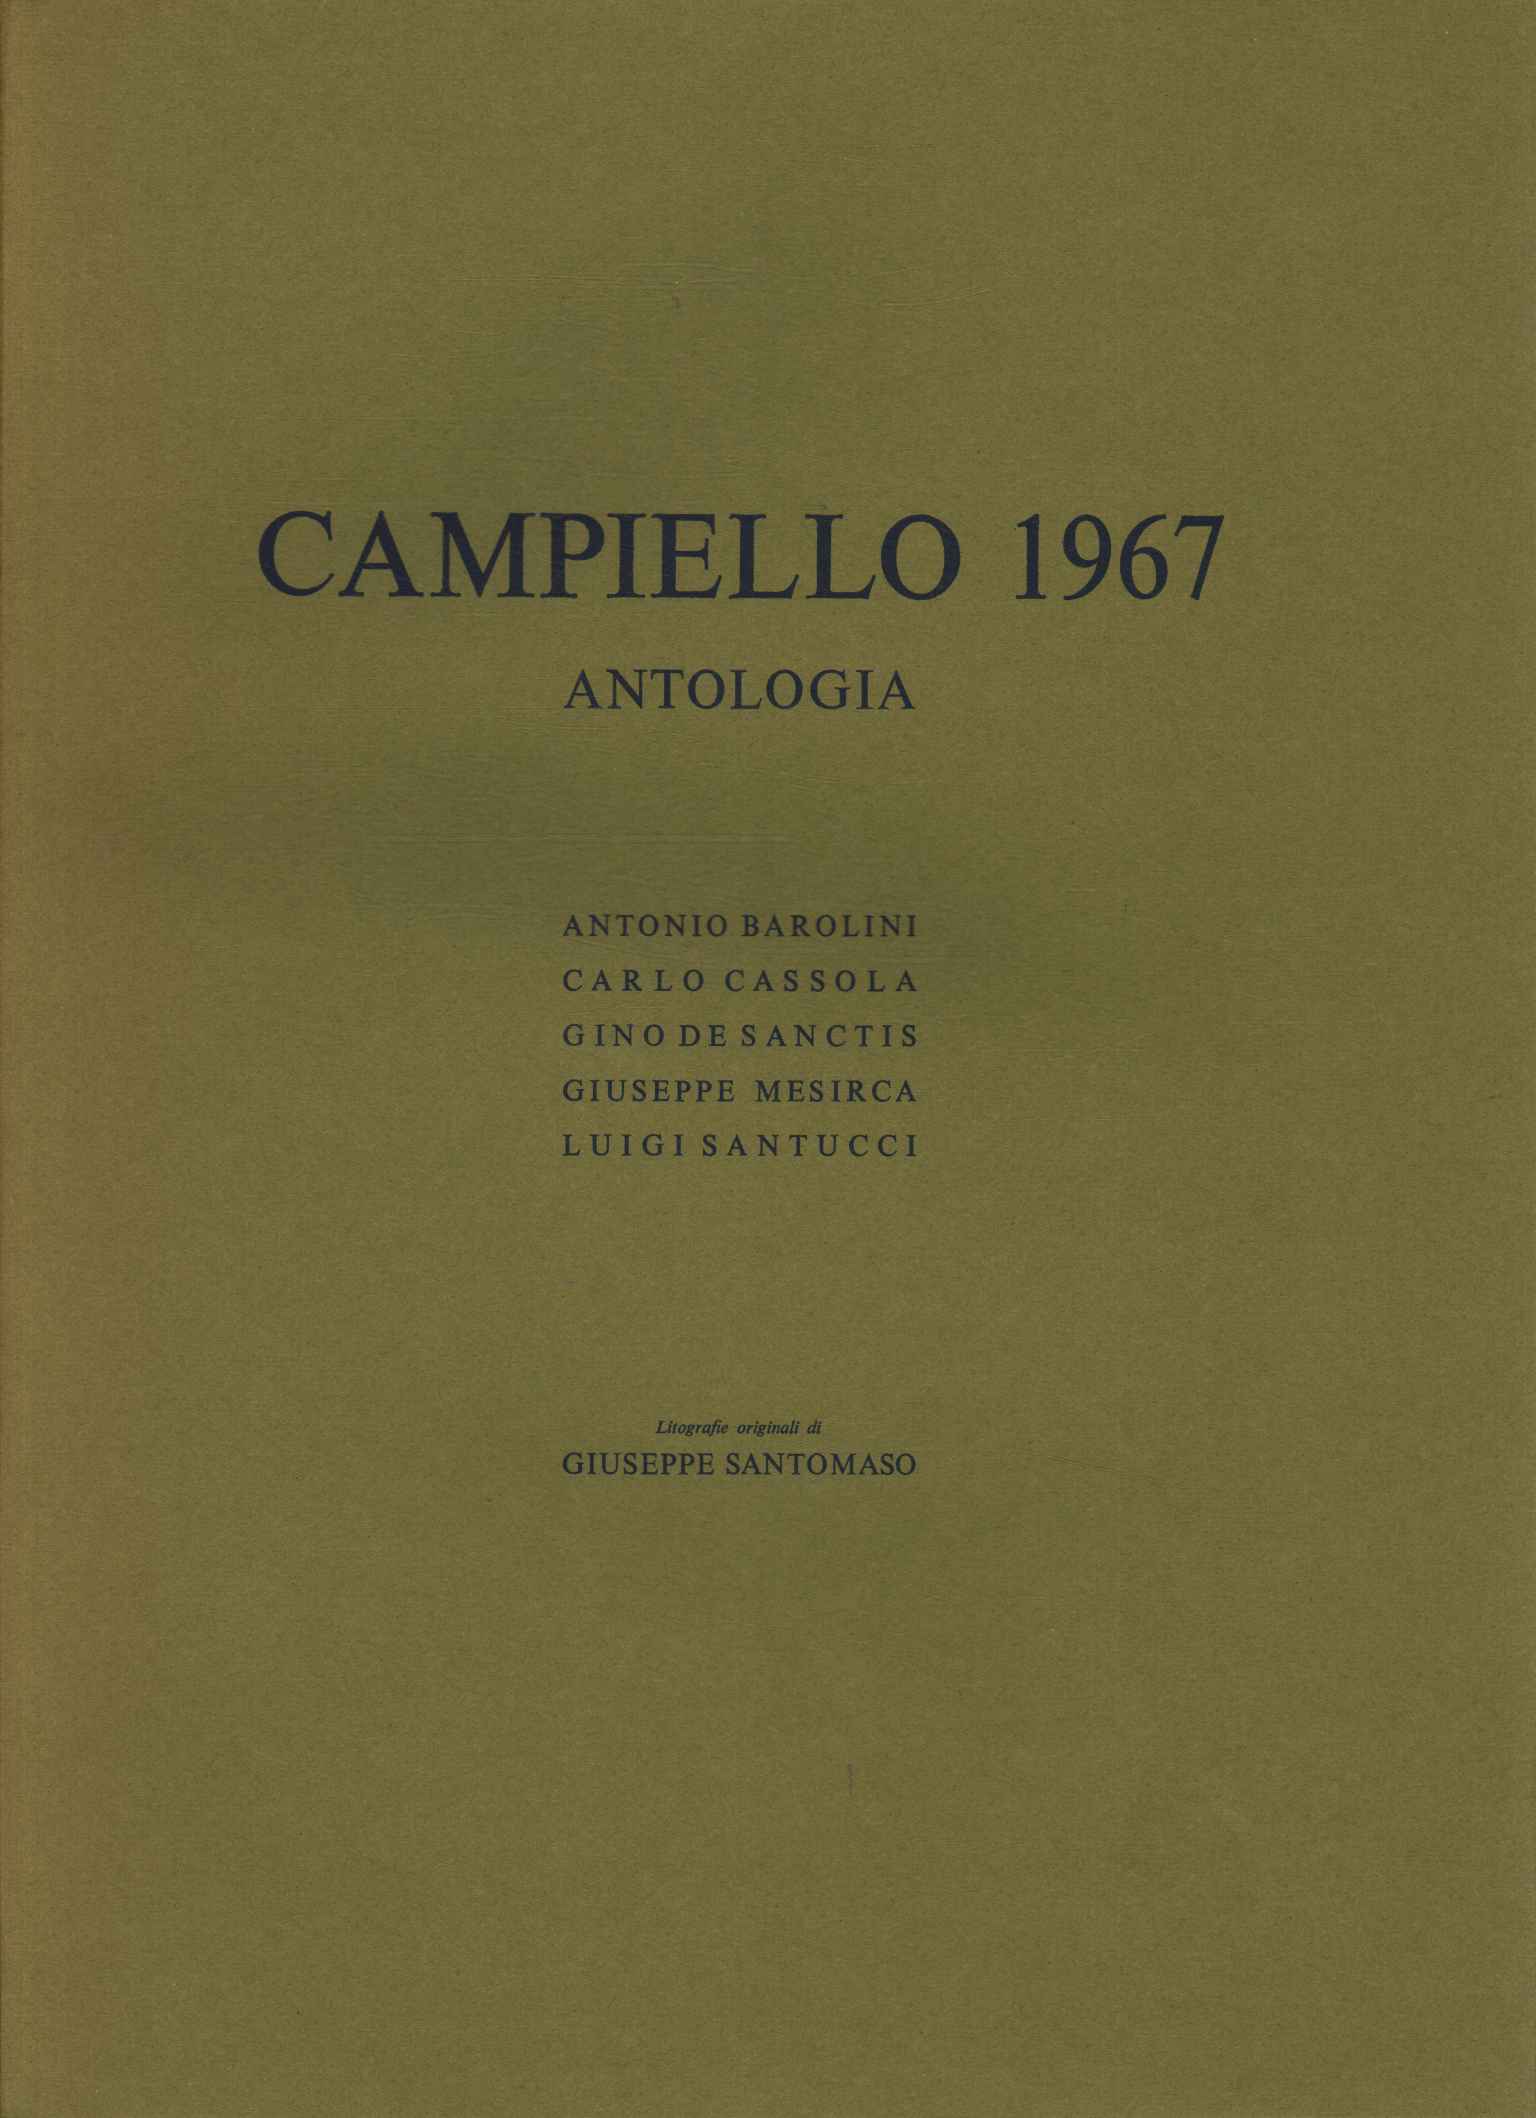 Anthology by Campiello 1967